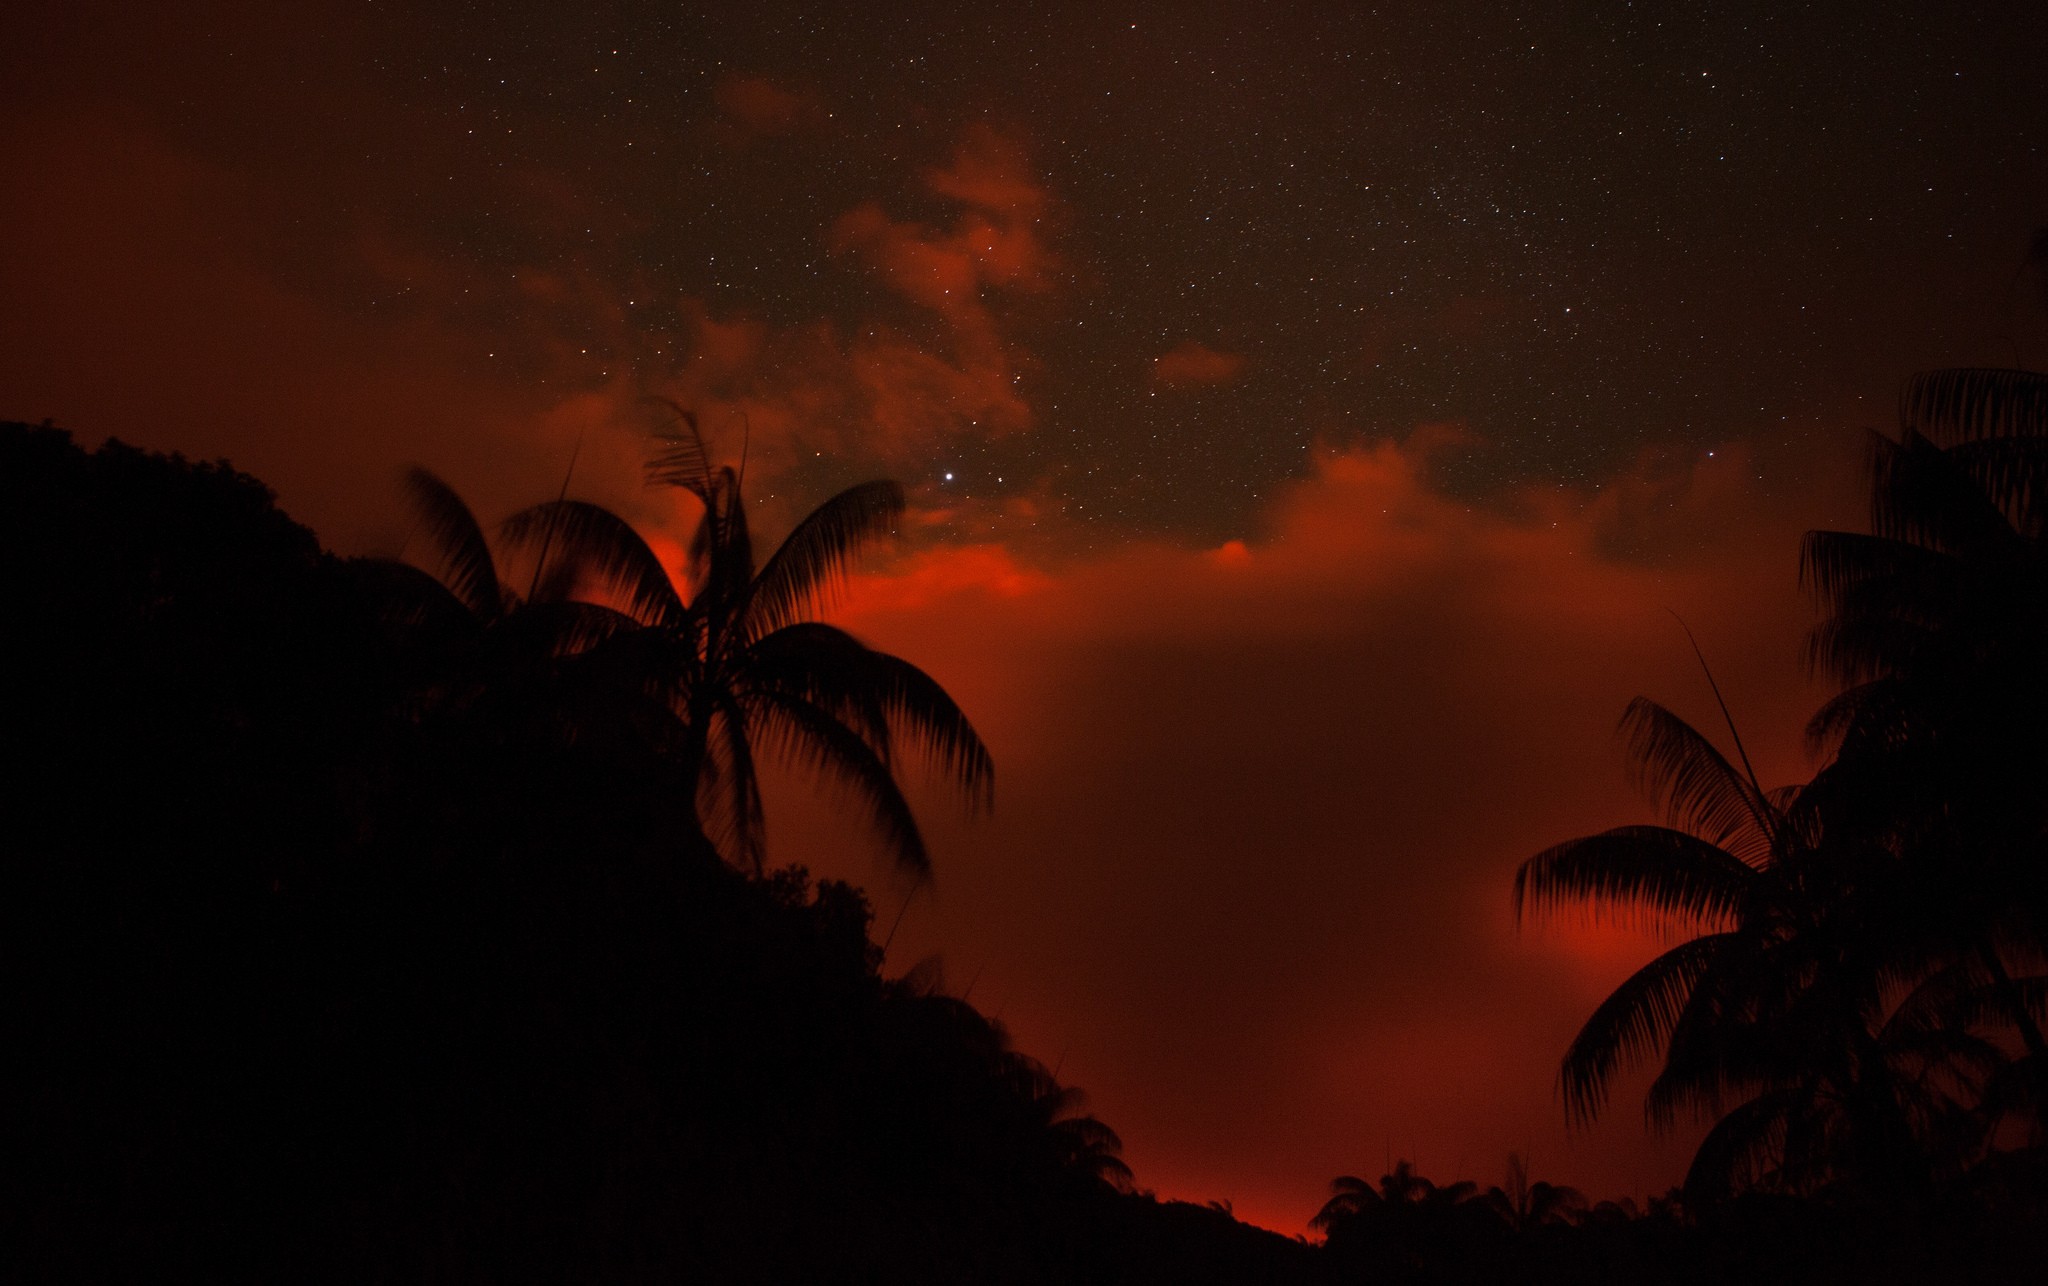 General 2048x1286 palm trees silhouette night skyscape tropical red dark stars outdoors